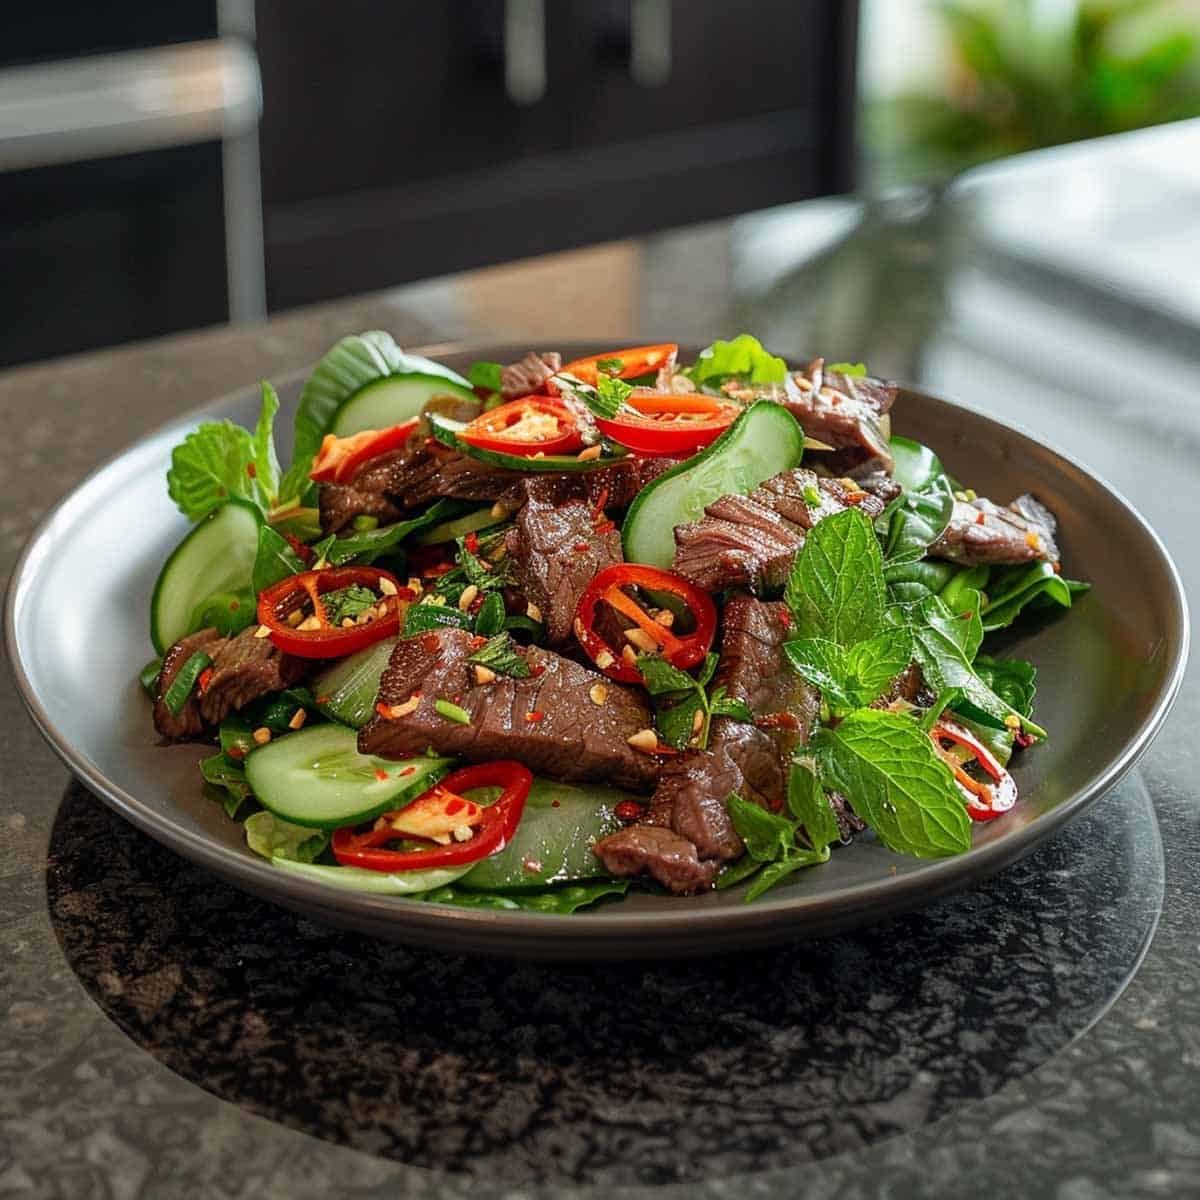 Plate of Thai Beef Salad Nam Tok, showcasing sliced grilled beef mixed with fresh herbs and zesty dressing."